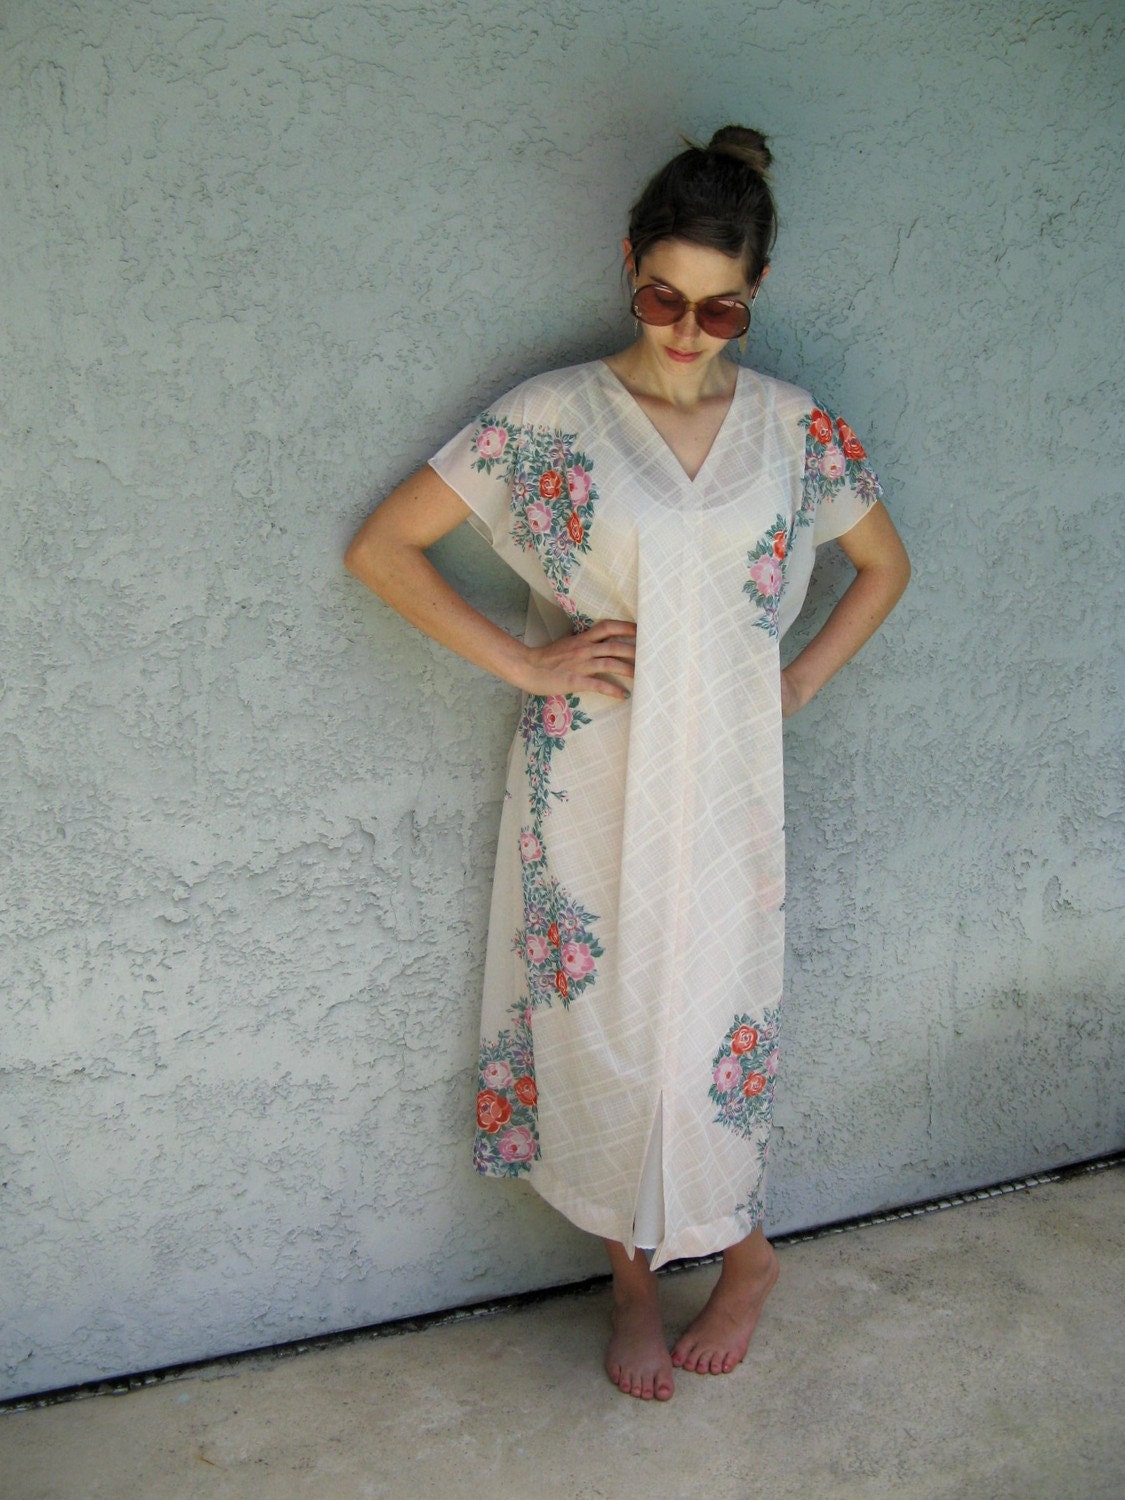 Vintage 70s Hippie Flower Power Sheer White MAXI MUMU dress with Dramatic Angel Wing Sleeves